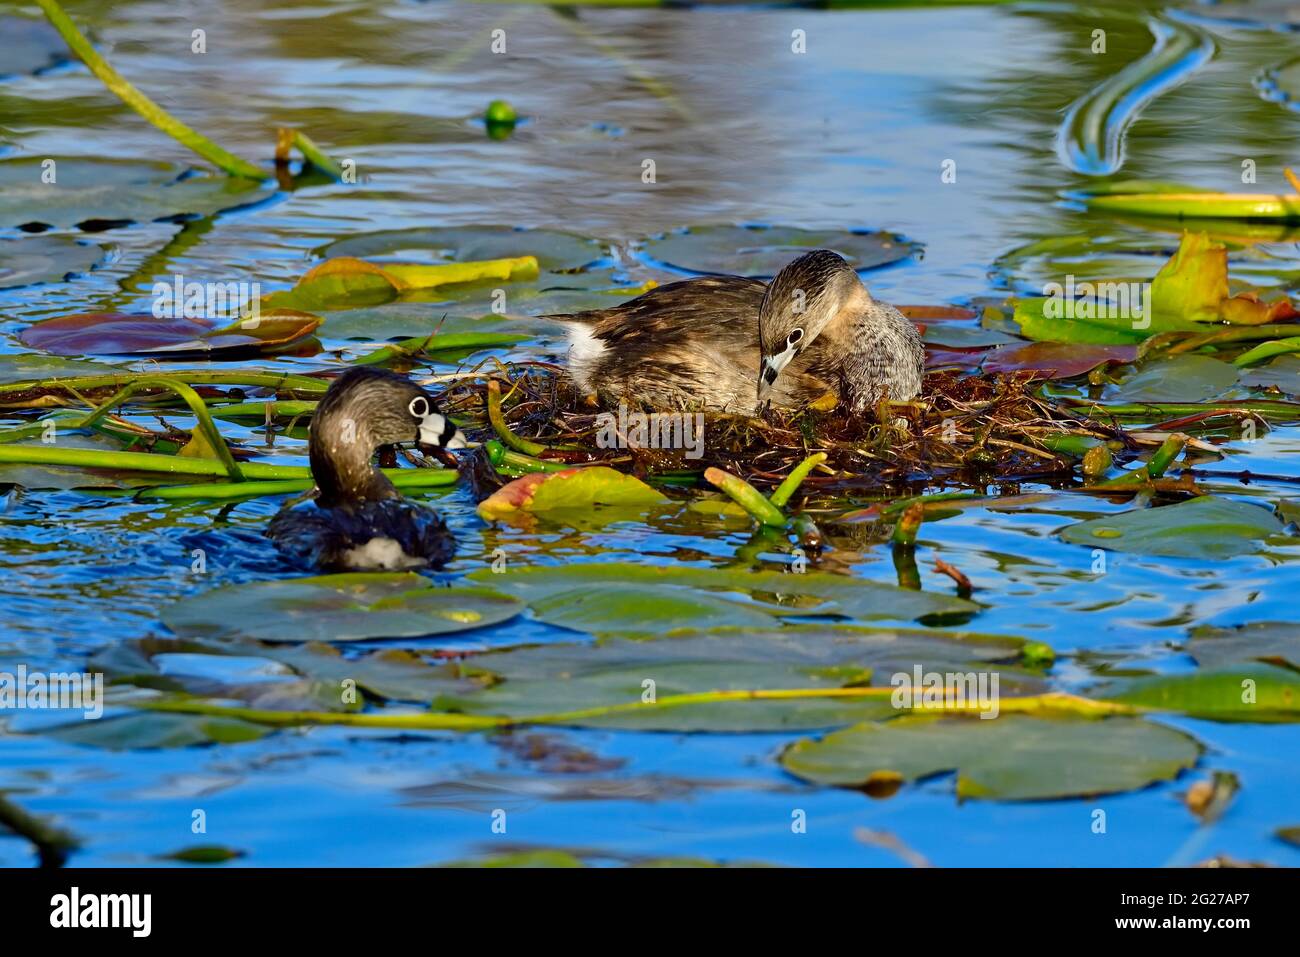 Two Pied-billed Grebes 'Podilymbus podiceps'; building  a floating nest made of lilly pads at the marshy area in a rural Alberta Lake Stock Photo